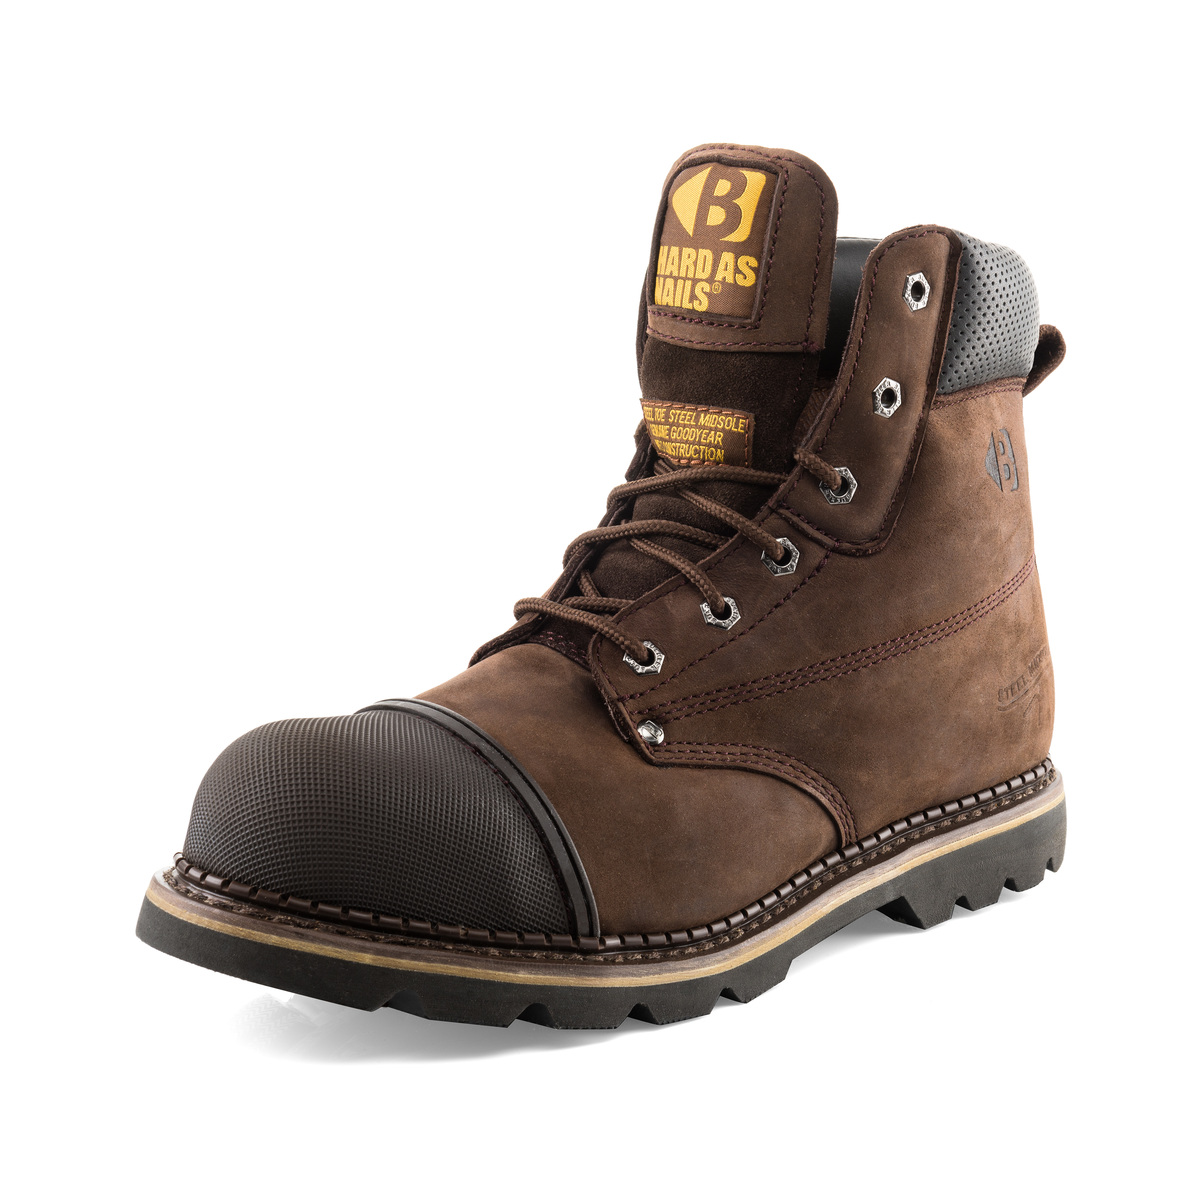 Buckler B301SM SBP brown leather steel toe safety boot with midsole 